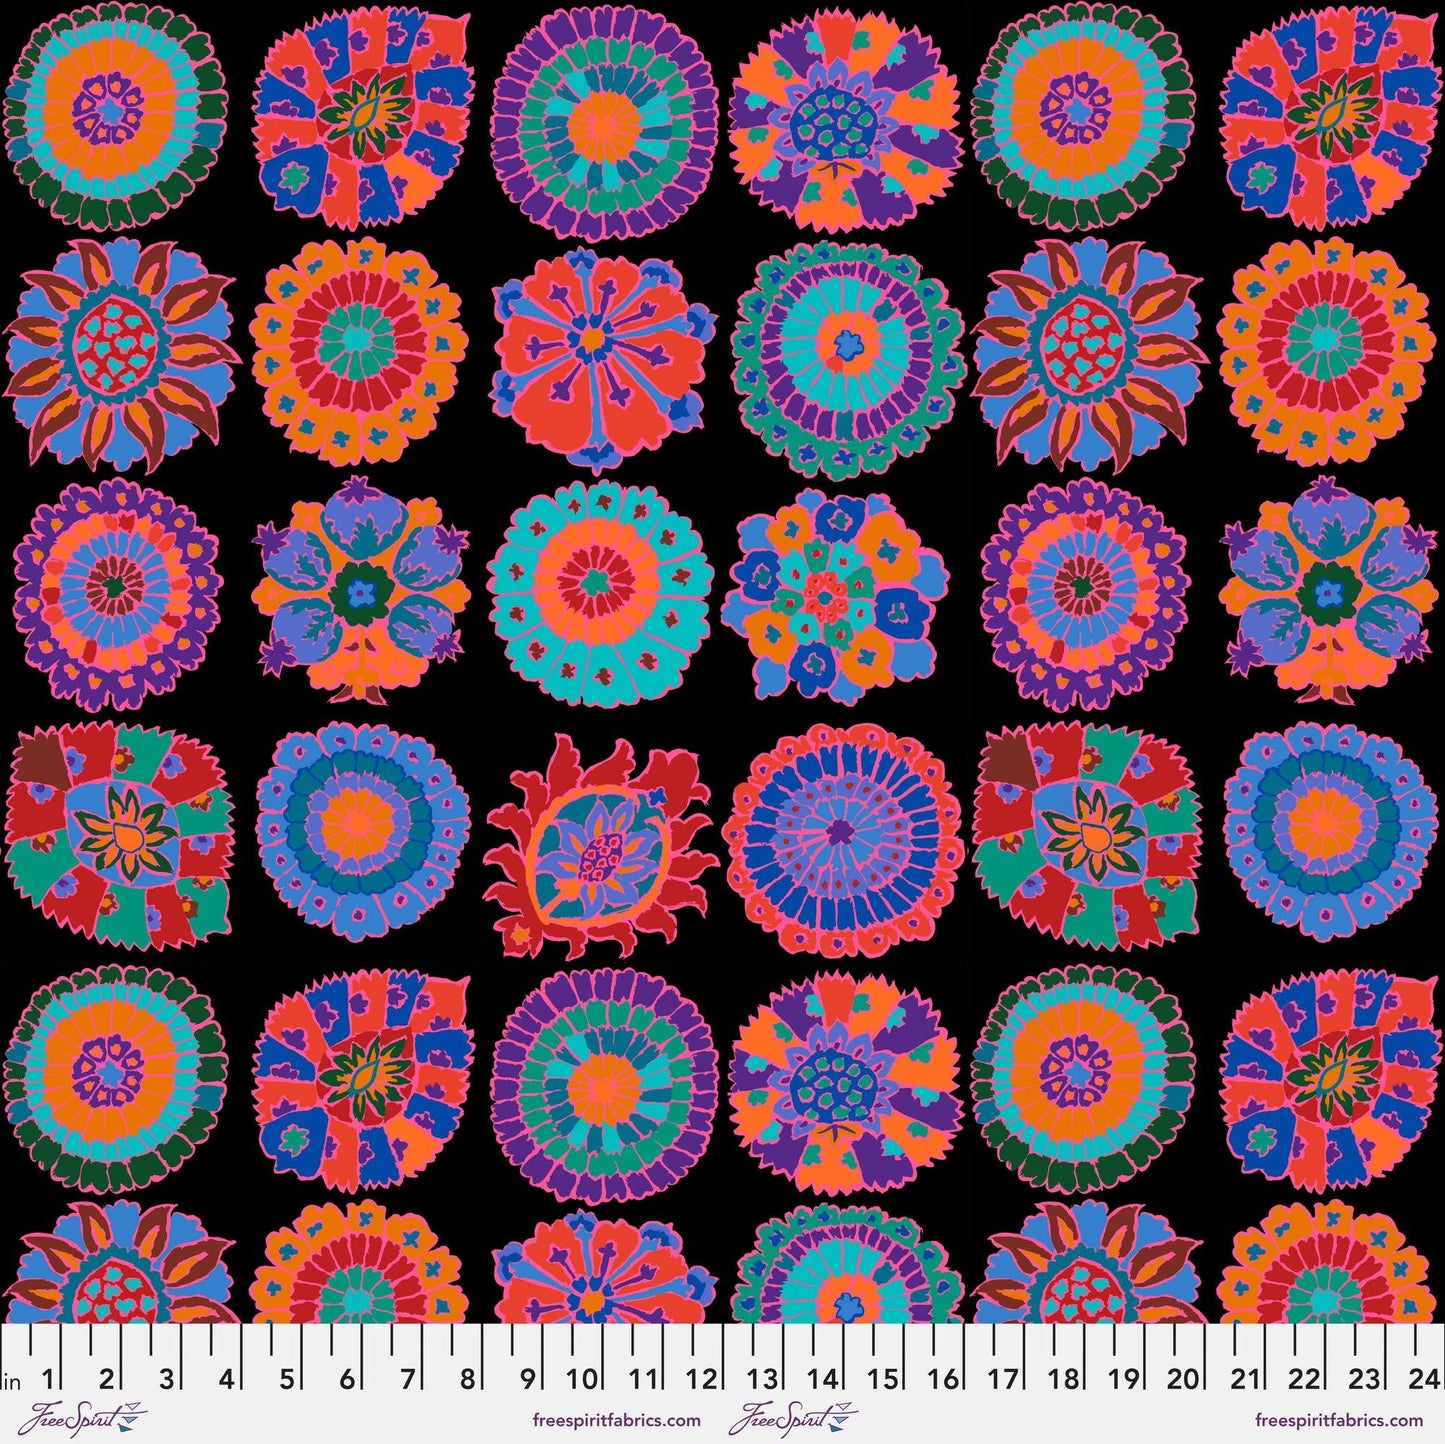 Carpet Cookie Black Kaffe Fassett Collective February 2023 100% Quilters Cotton Fabric Fetish